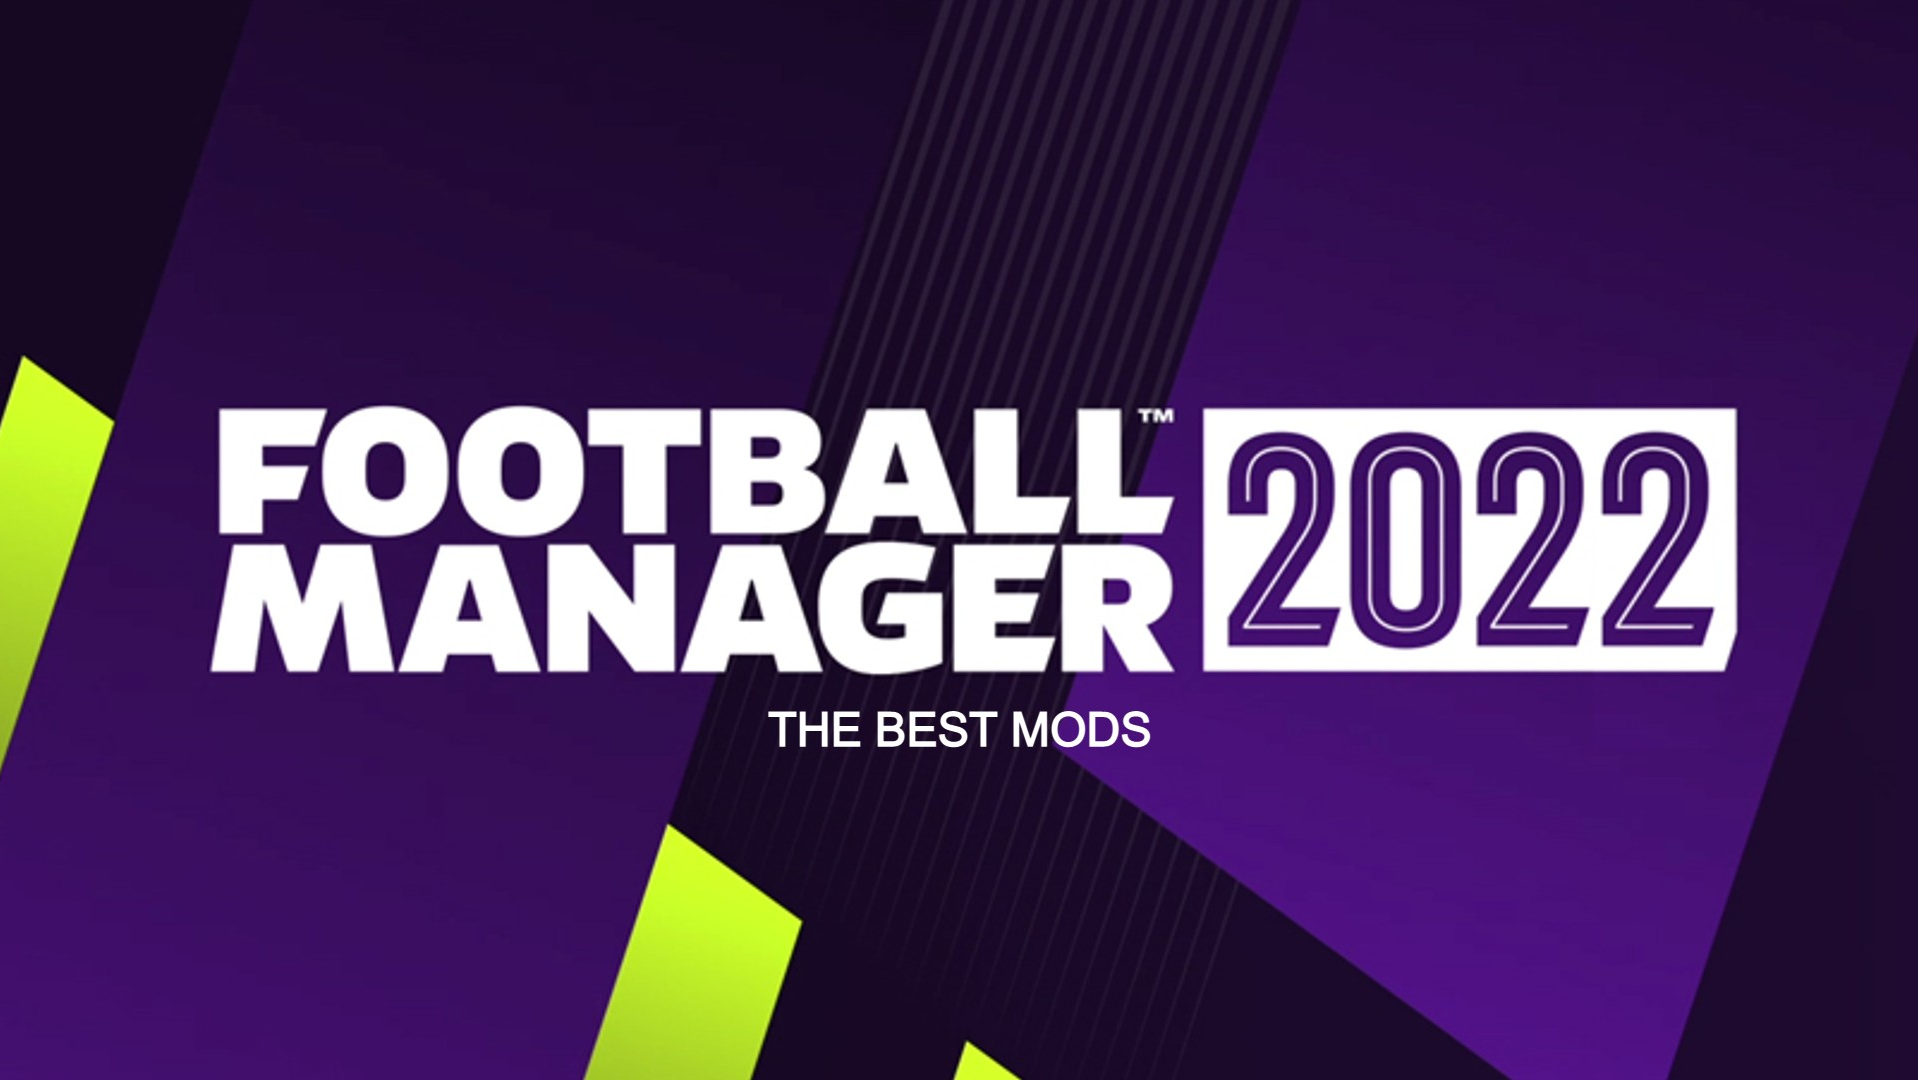 FM Scout Editor 2022 - Exclusive Download